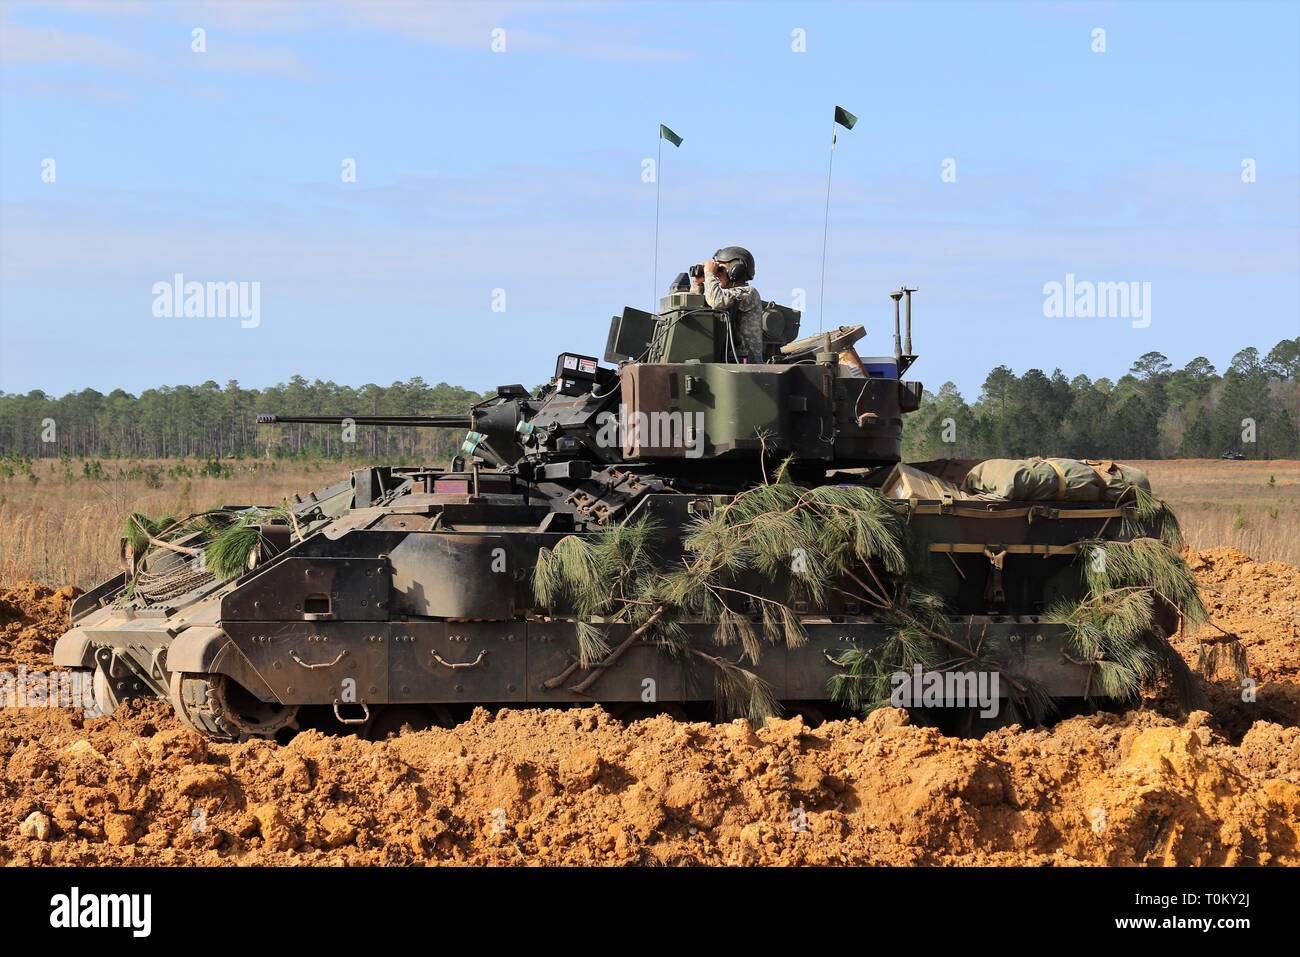 Soldiers from the 2nd Battalion, 7th Infantry Regiment, 1st Armored Brigade Combat Team in their Bradley Fighting Vehicle during Marne Focus at Fort Stewart, Ga.  Marne Focus is the culminating home station training event designed to validate the mission readiness of the 2nd Brigade Combat Team, 3rd Infantry Division as they prepare for their upcoming rotation to the National Training Center at Fort Irwin, CA. Stock Photo